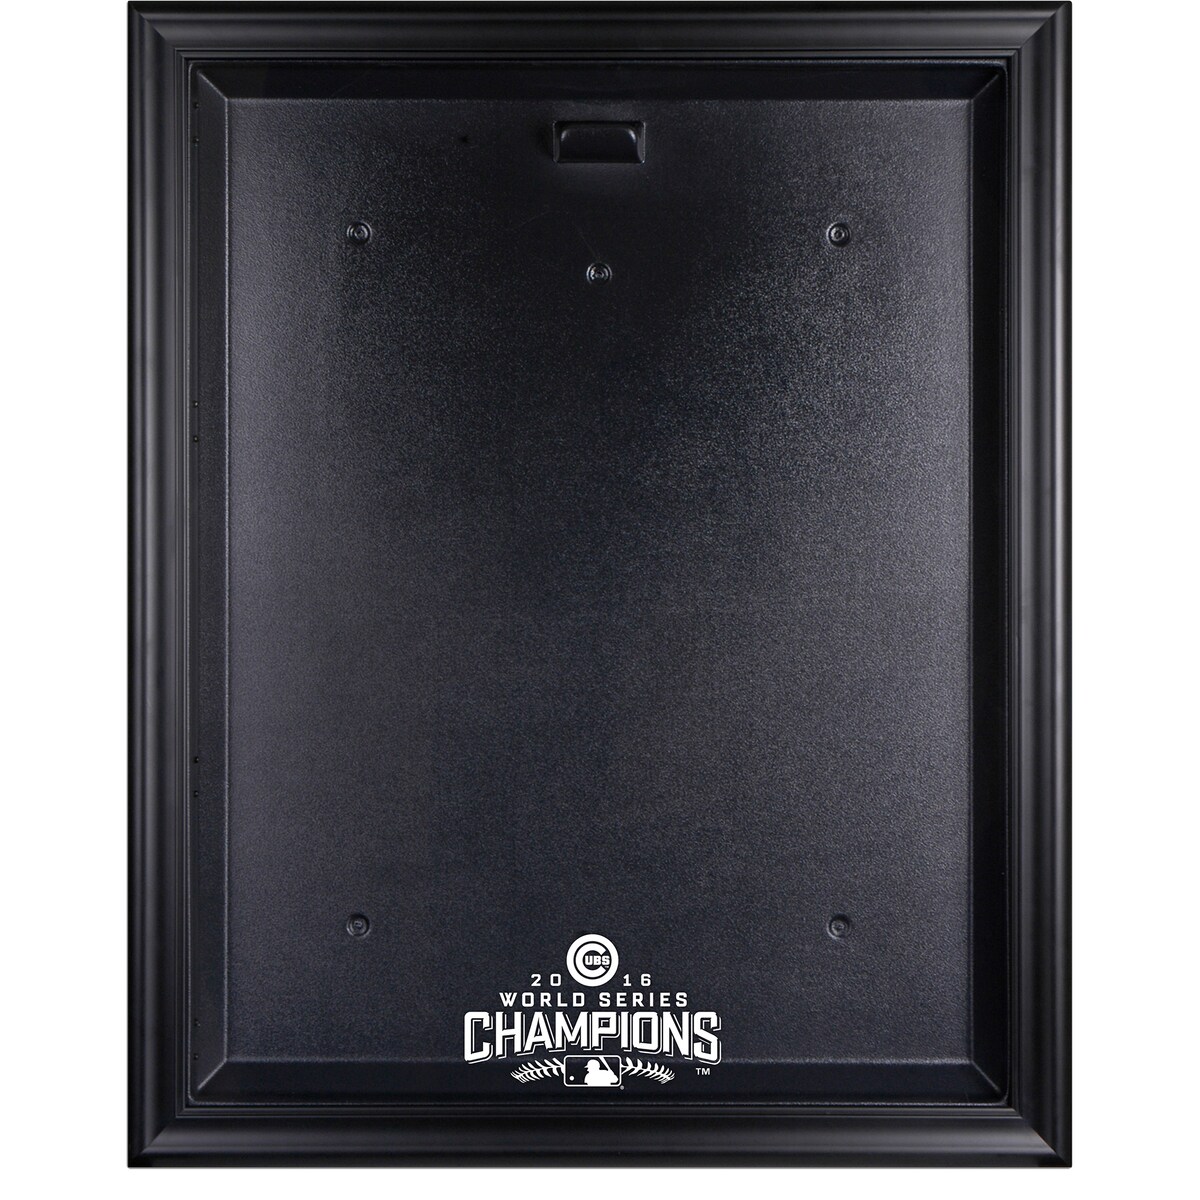 Celebrate the Chicago Cubs as 2016 World Series Champions with this collectible display case. The black framed logo jersey display case opens on hinges and is easily wall mounted. It comes with a 24'' clear acrylic rod to display a collectible jersey and is constructed with a durable, high-strength injection mold backing. It comes encased by a wood frame with engraved team logo. It is officially licensed by Major League Baseball. The inner dimensions of the case are 38'' x 29 1/2'' x 3'' with the outer measurements of 42'' x 34 1/2'' x 3 1/2''. Memorabilia is sold separately.Made in the USAMemorabilia sold separatelyBrand: Fanatics AuthenticOfficially licensedMeasures 42'' x 34 1/2'' x 3 1/2''